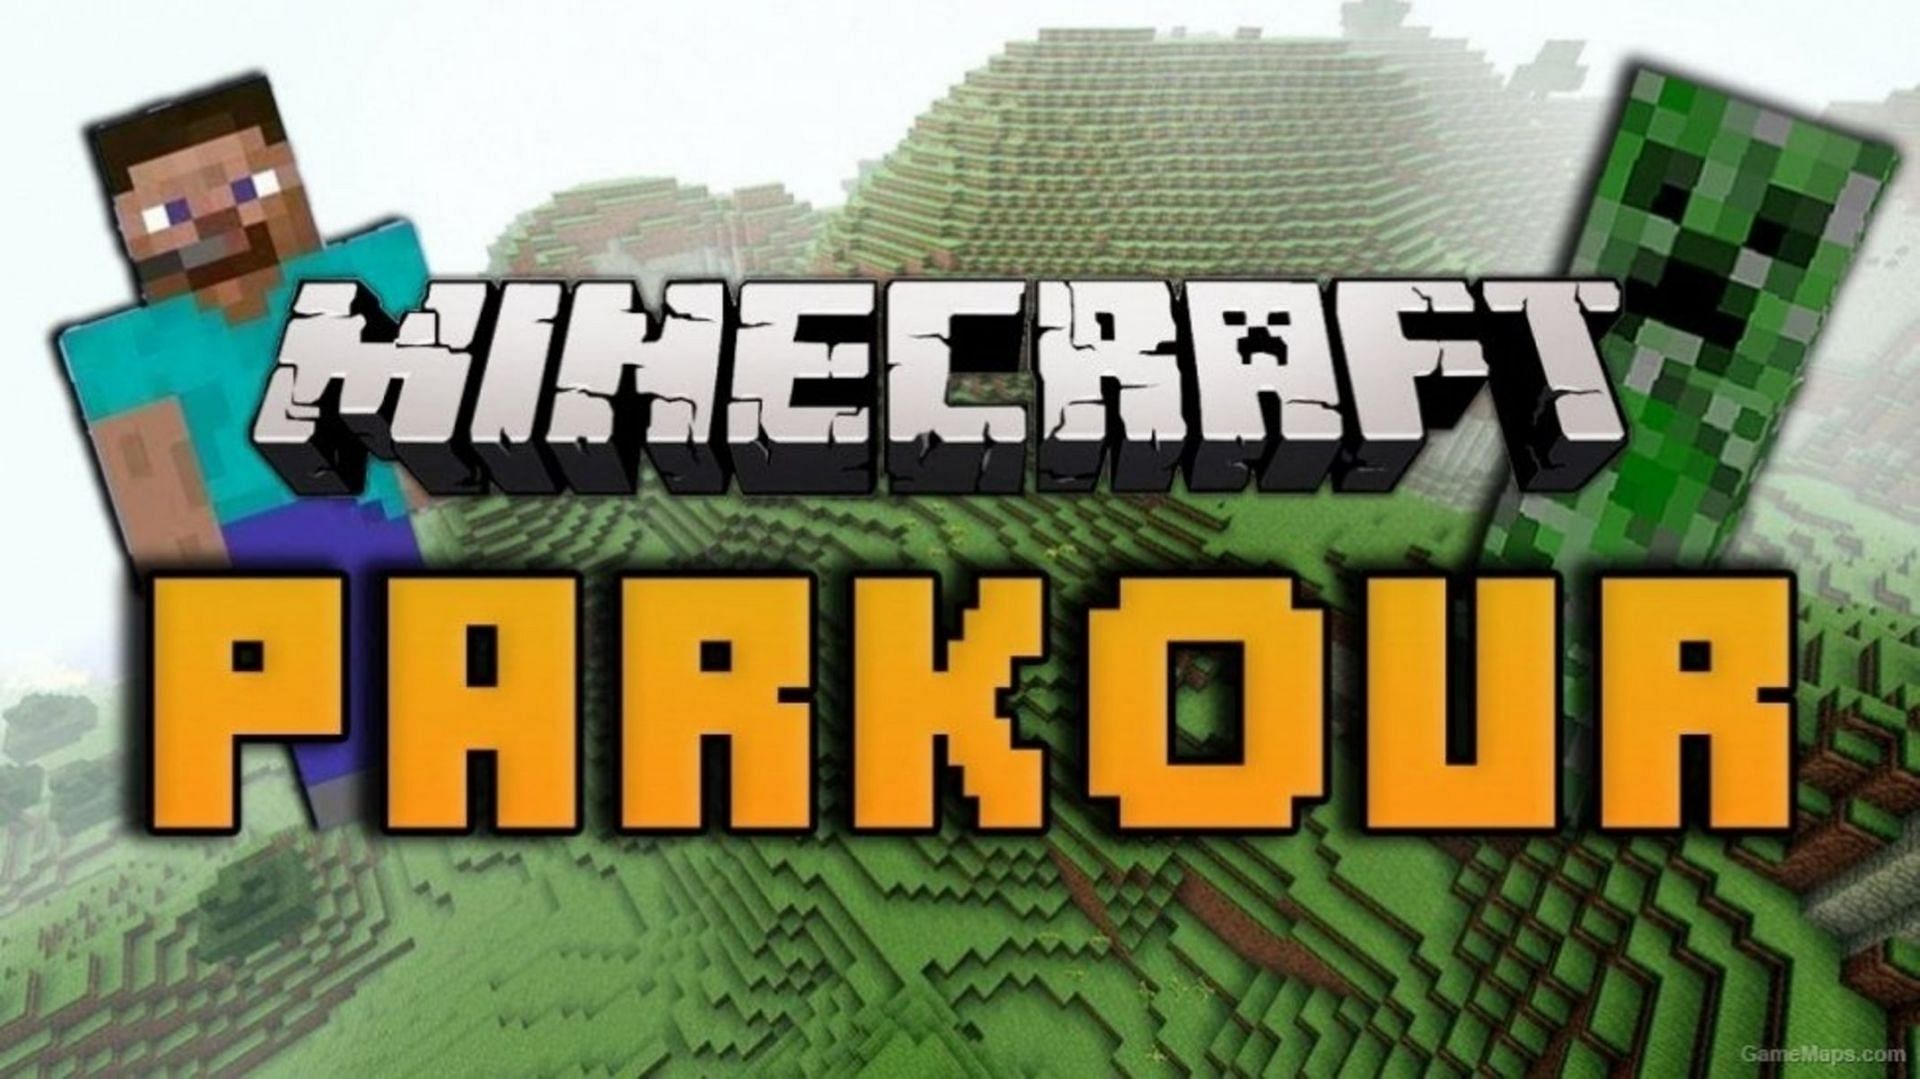 Parkour is an intense but fun game mode envisioned by the Minecraft community (Image via Mojang)